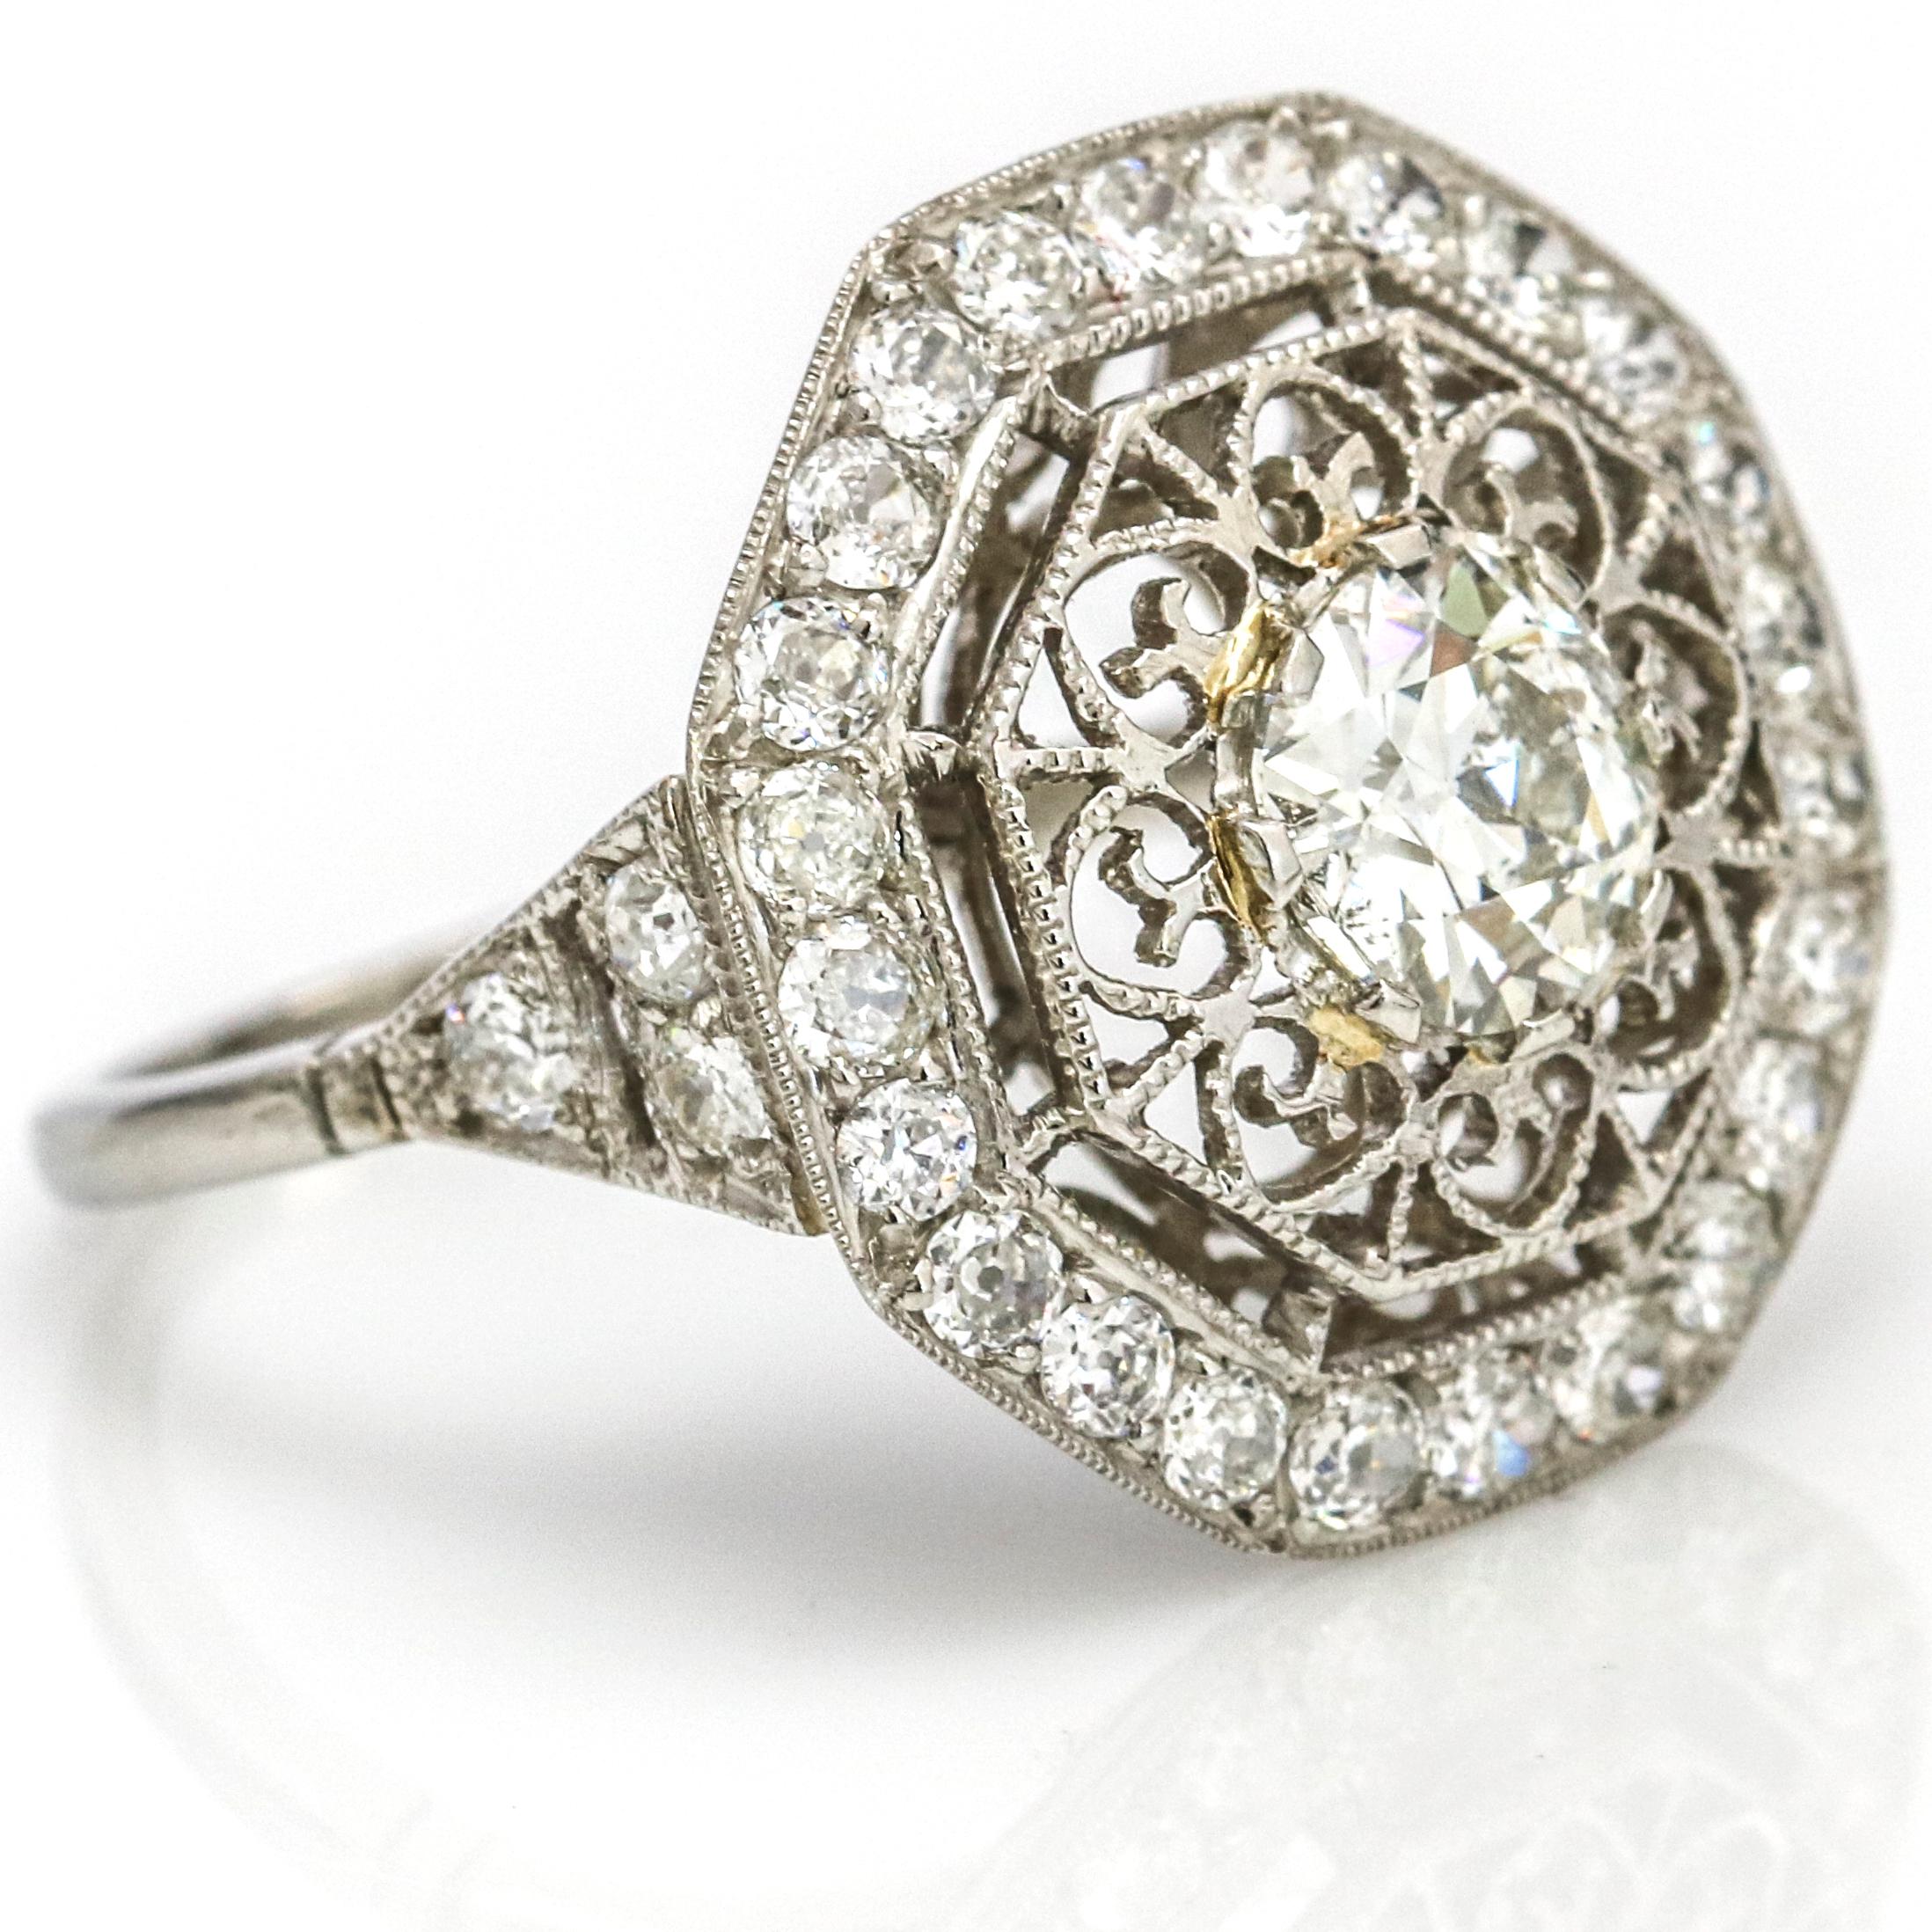 Art Deco diamond engagement ring in platinum. Octagon shaped setting with an old mine cut diamond center that weighs 1.02 carats. There are 30 smaller diamonds on the halo, the estimated carat weight of those diamonds is 1.50 carats. Circa 1920s.